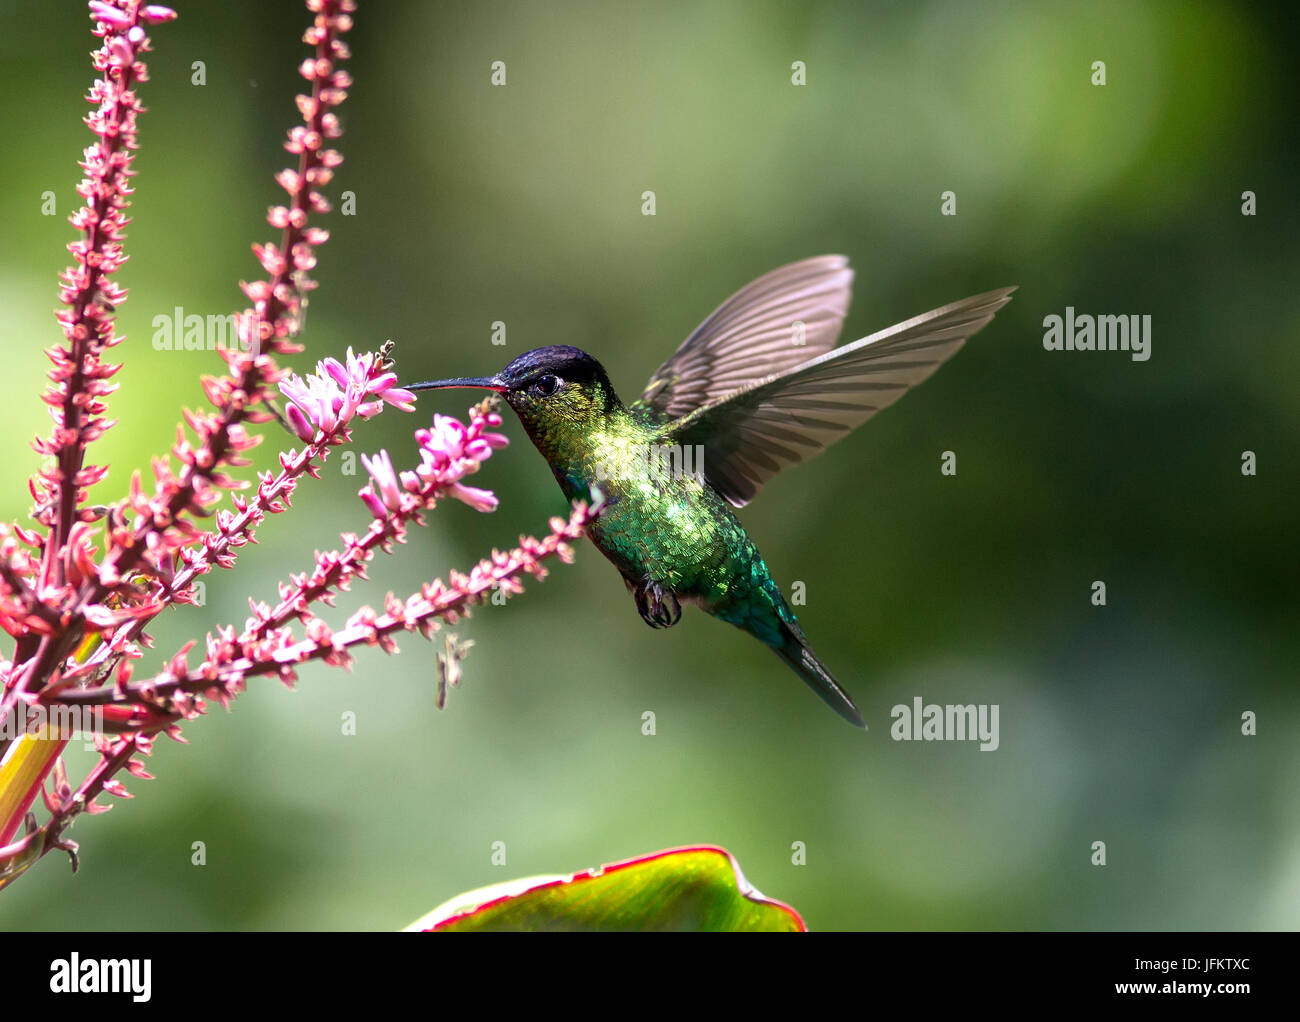 Fiery-throated Hummingbird eating nectar from a flower Stock Photo